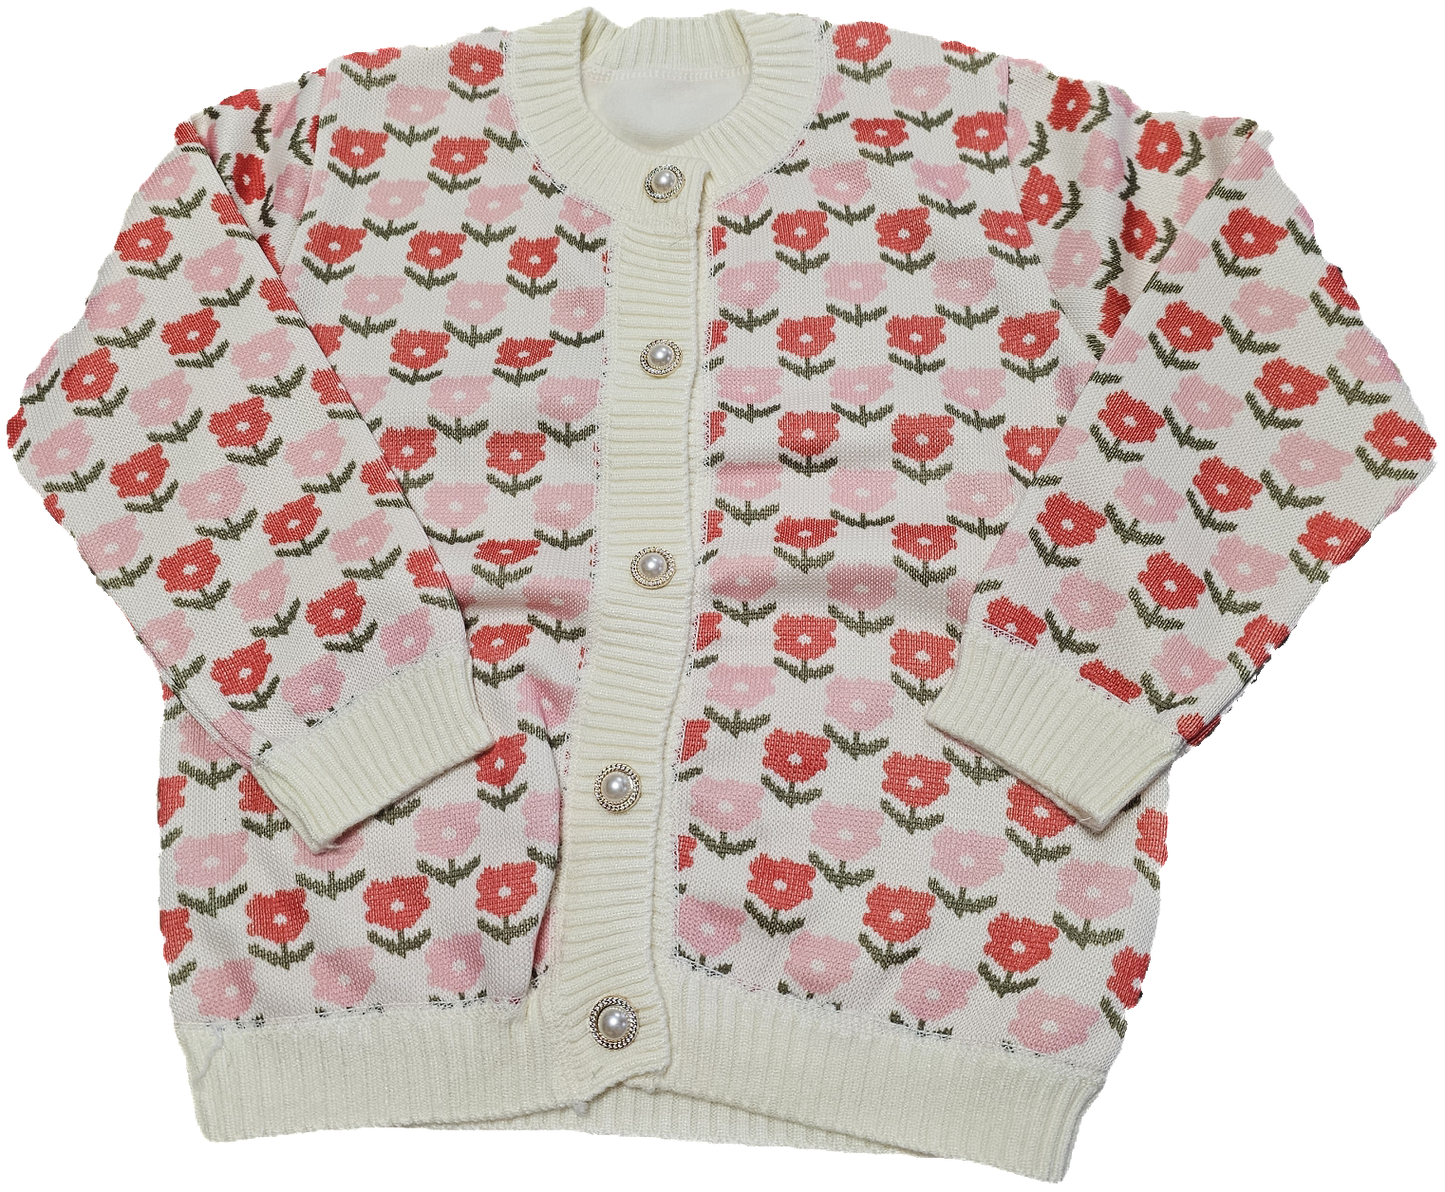 Emma button up cardigan (bows, strawberry, flowers)